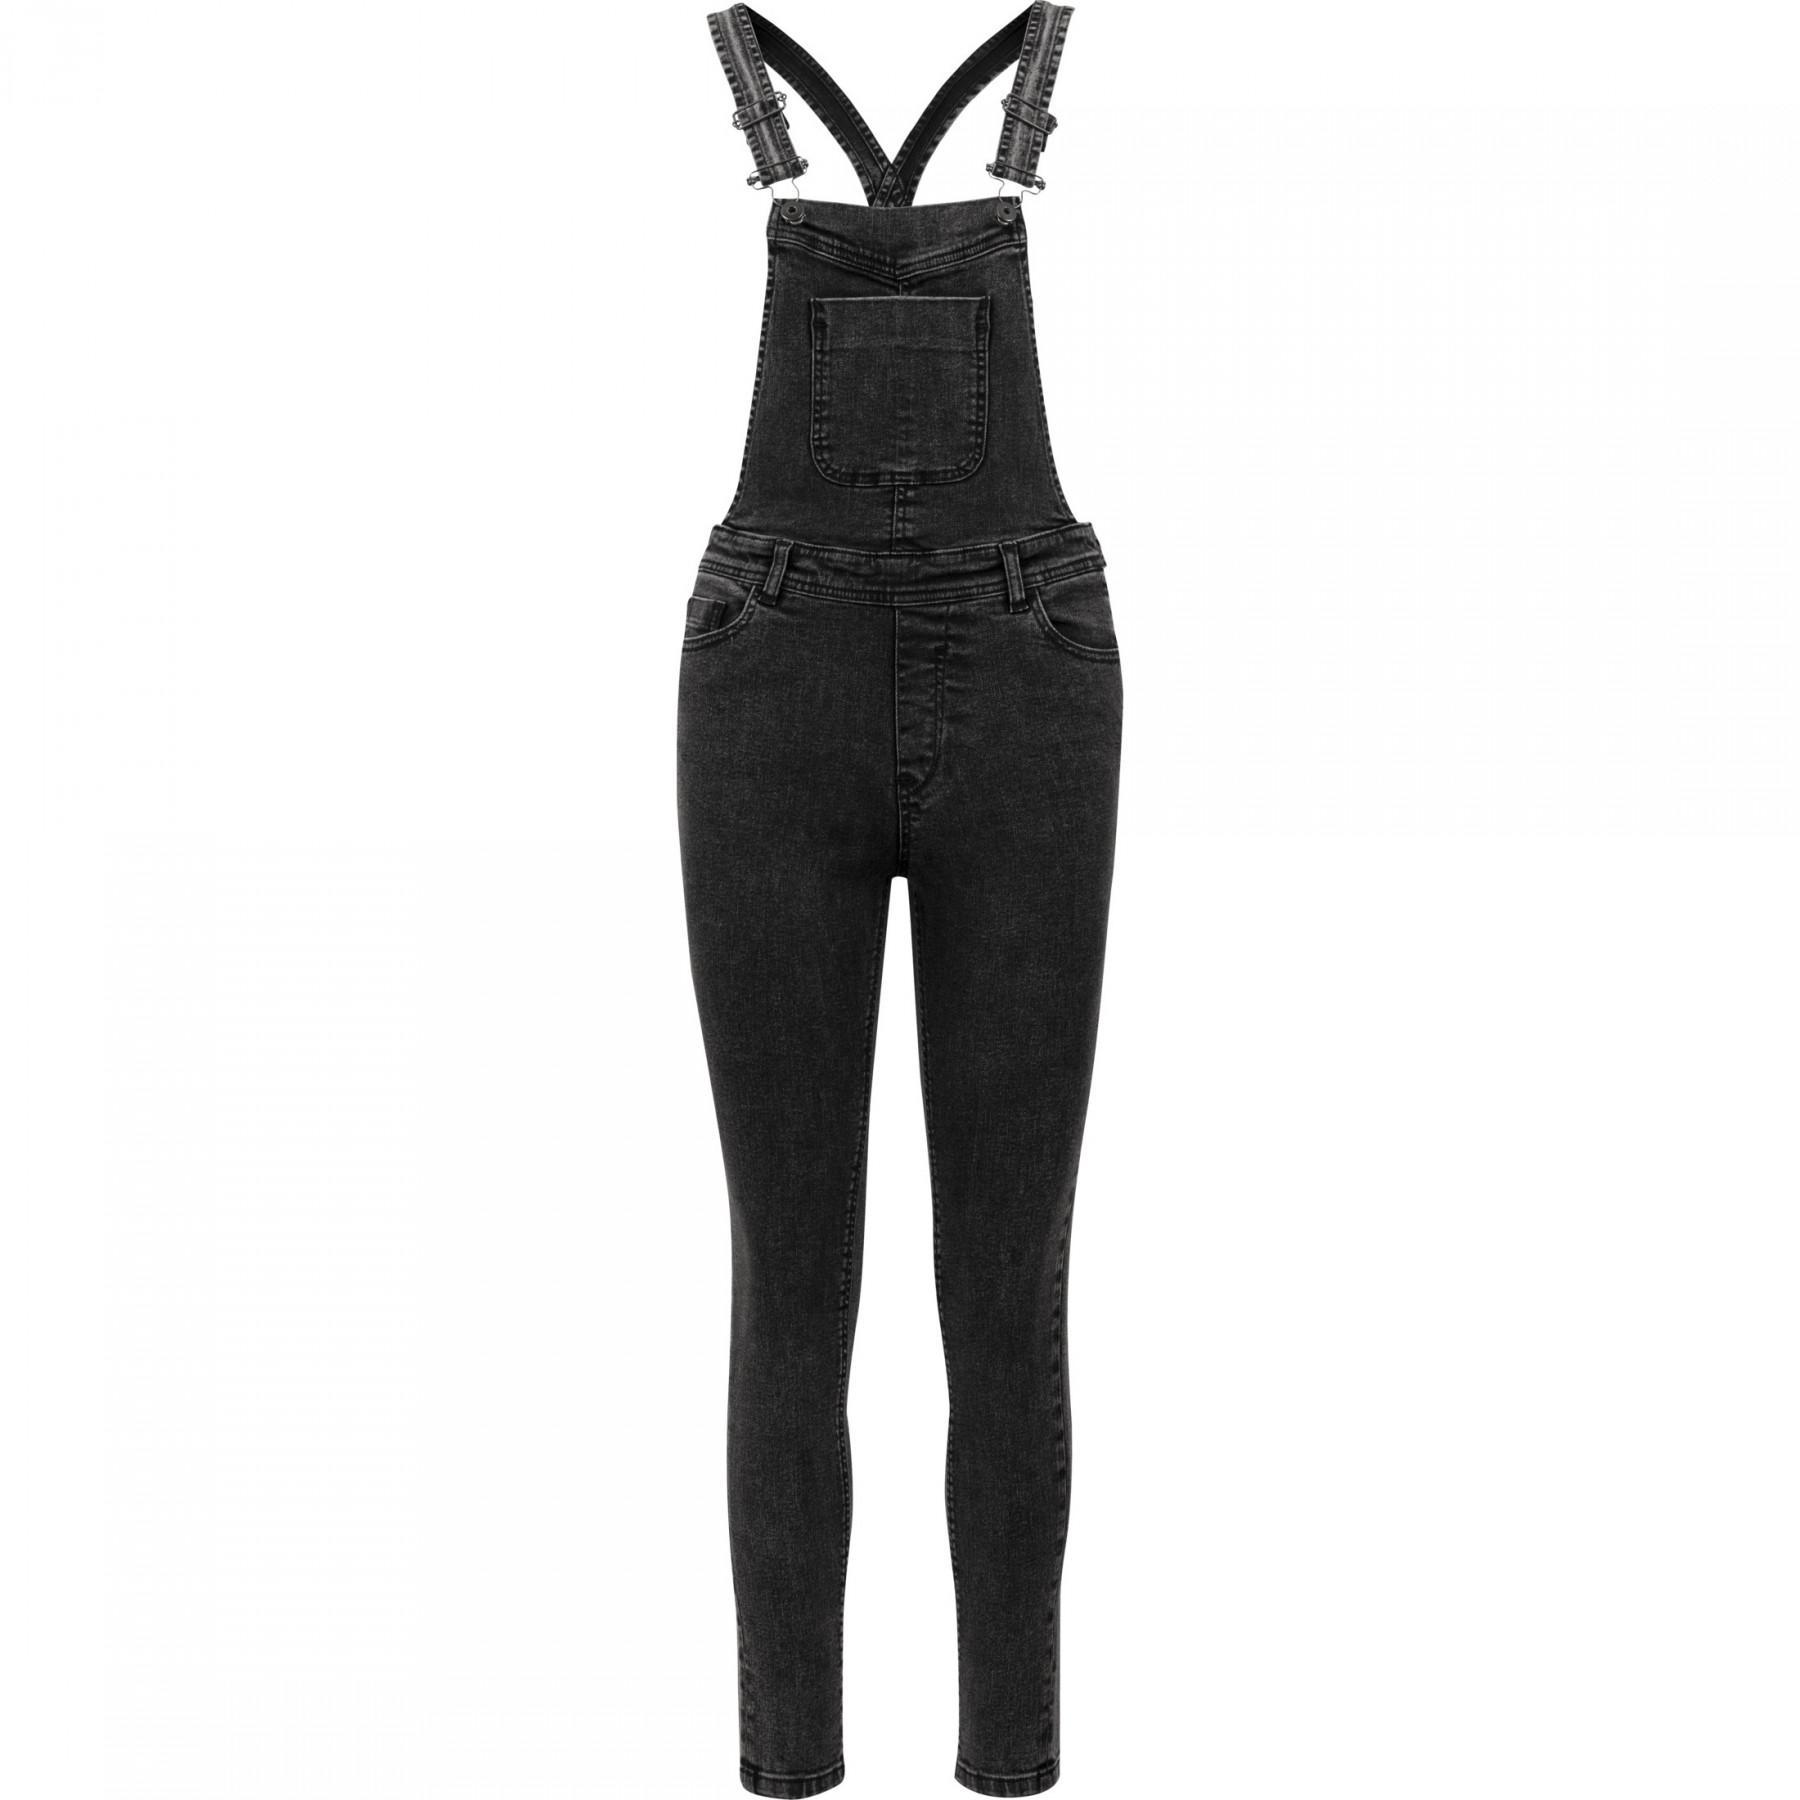 Trousers woman Urban Classic dungaree